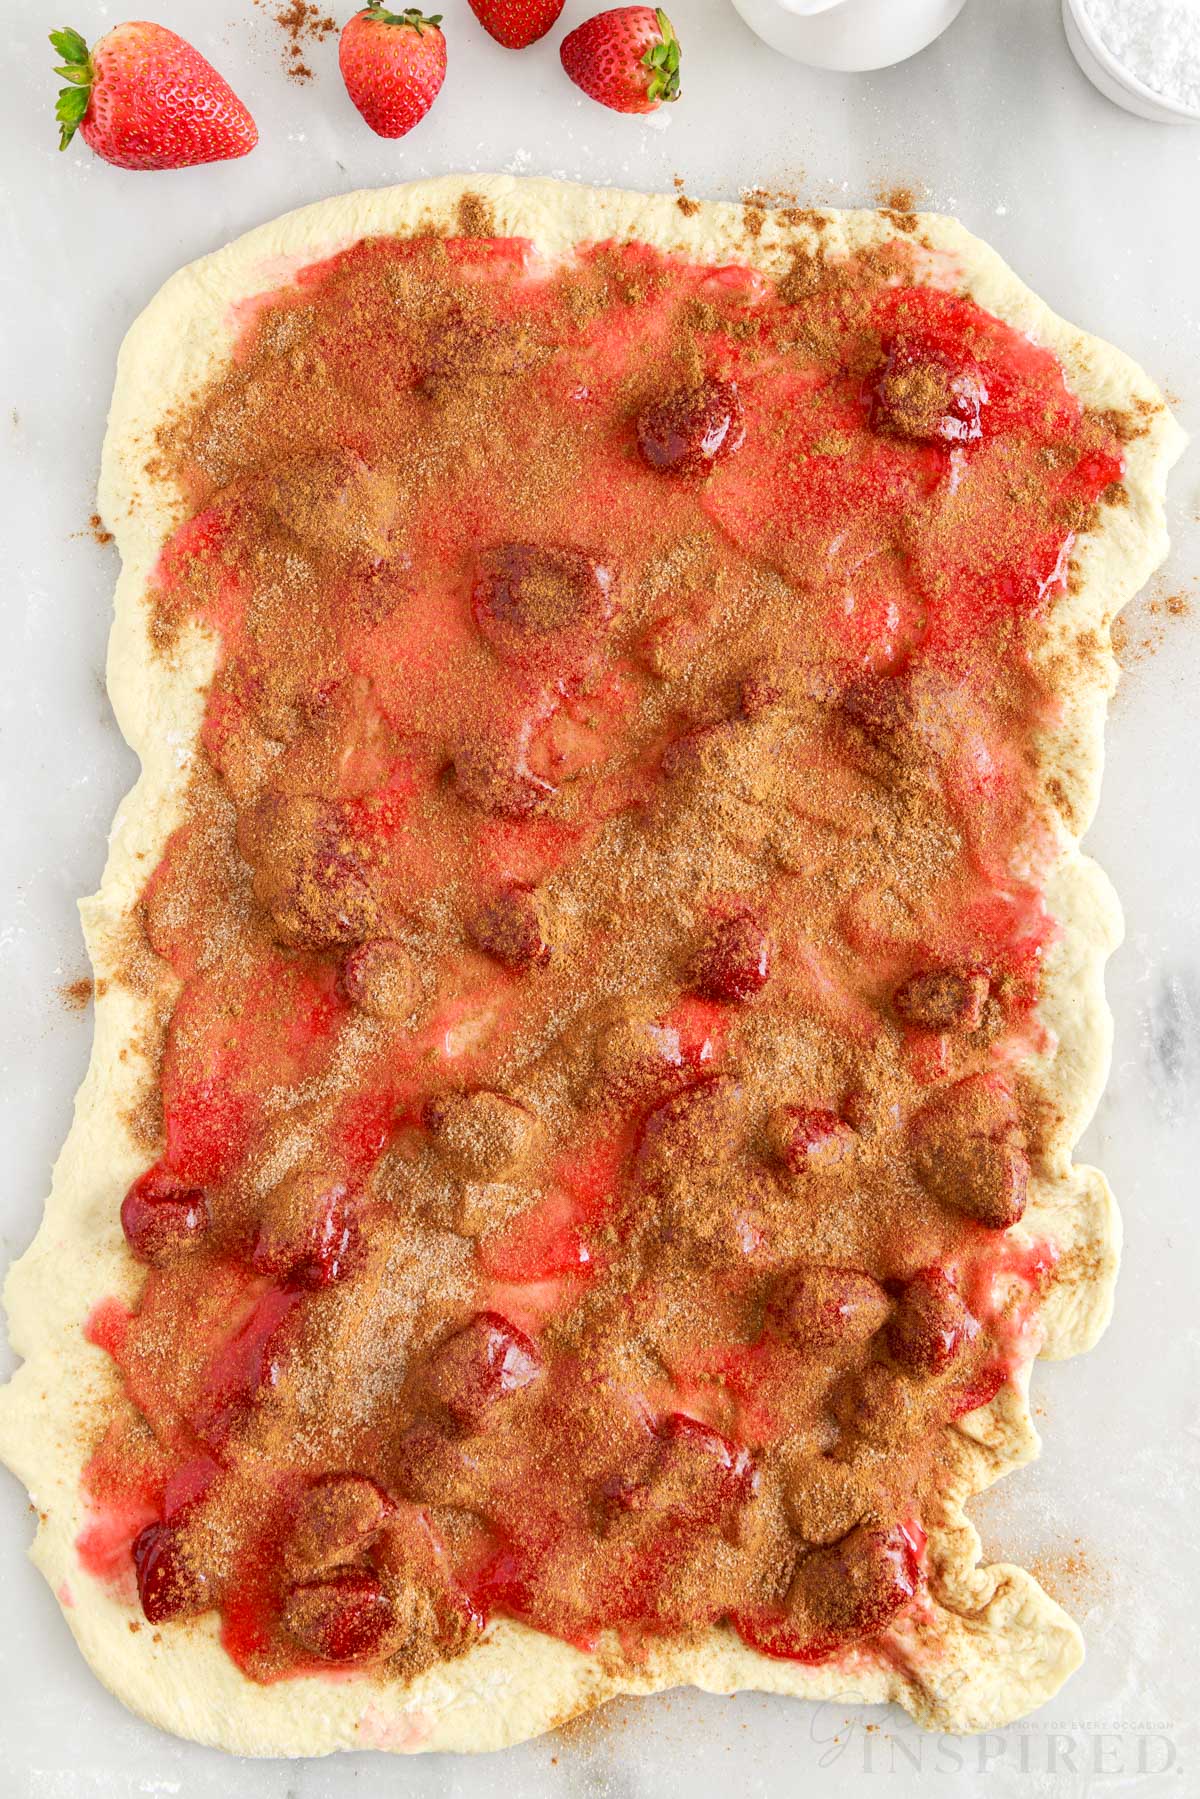 Cinnamon and sugar layered over strawberry pie filling on top of dough.